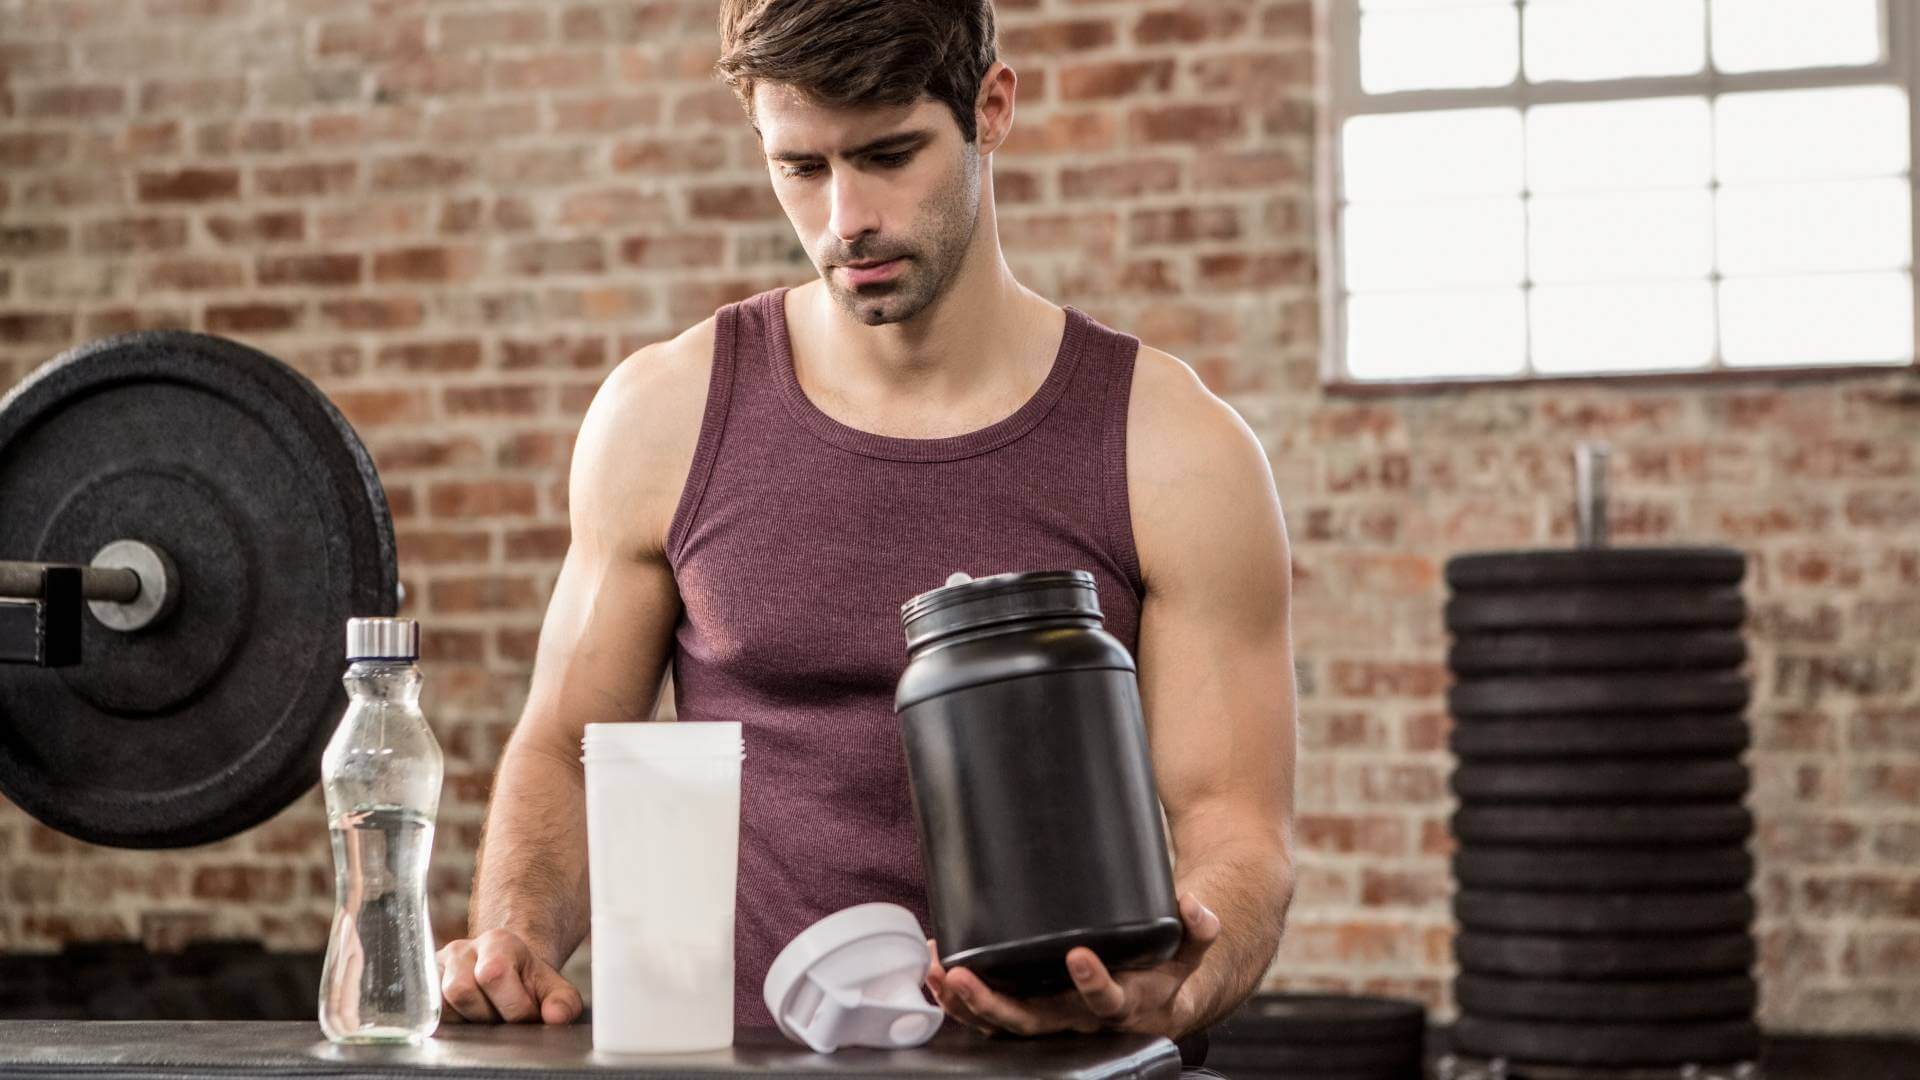 Pre-Workout Guide: 6 Steps to Improve Your Exercise Routines